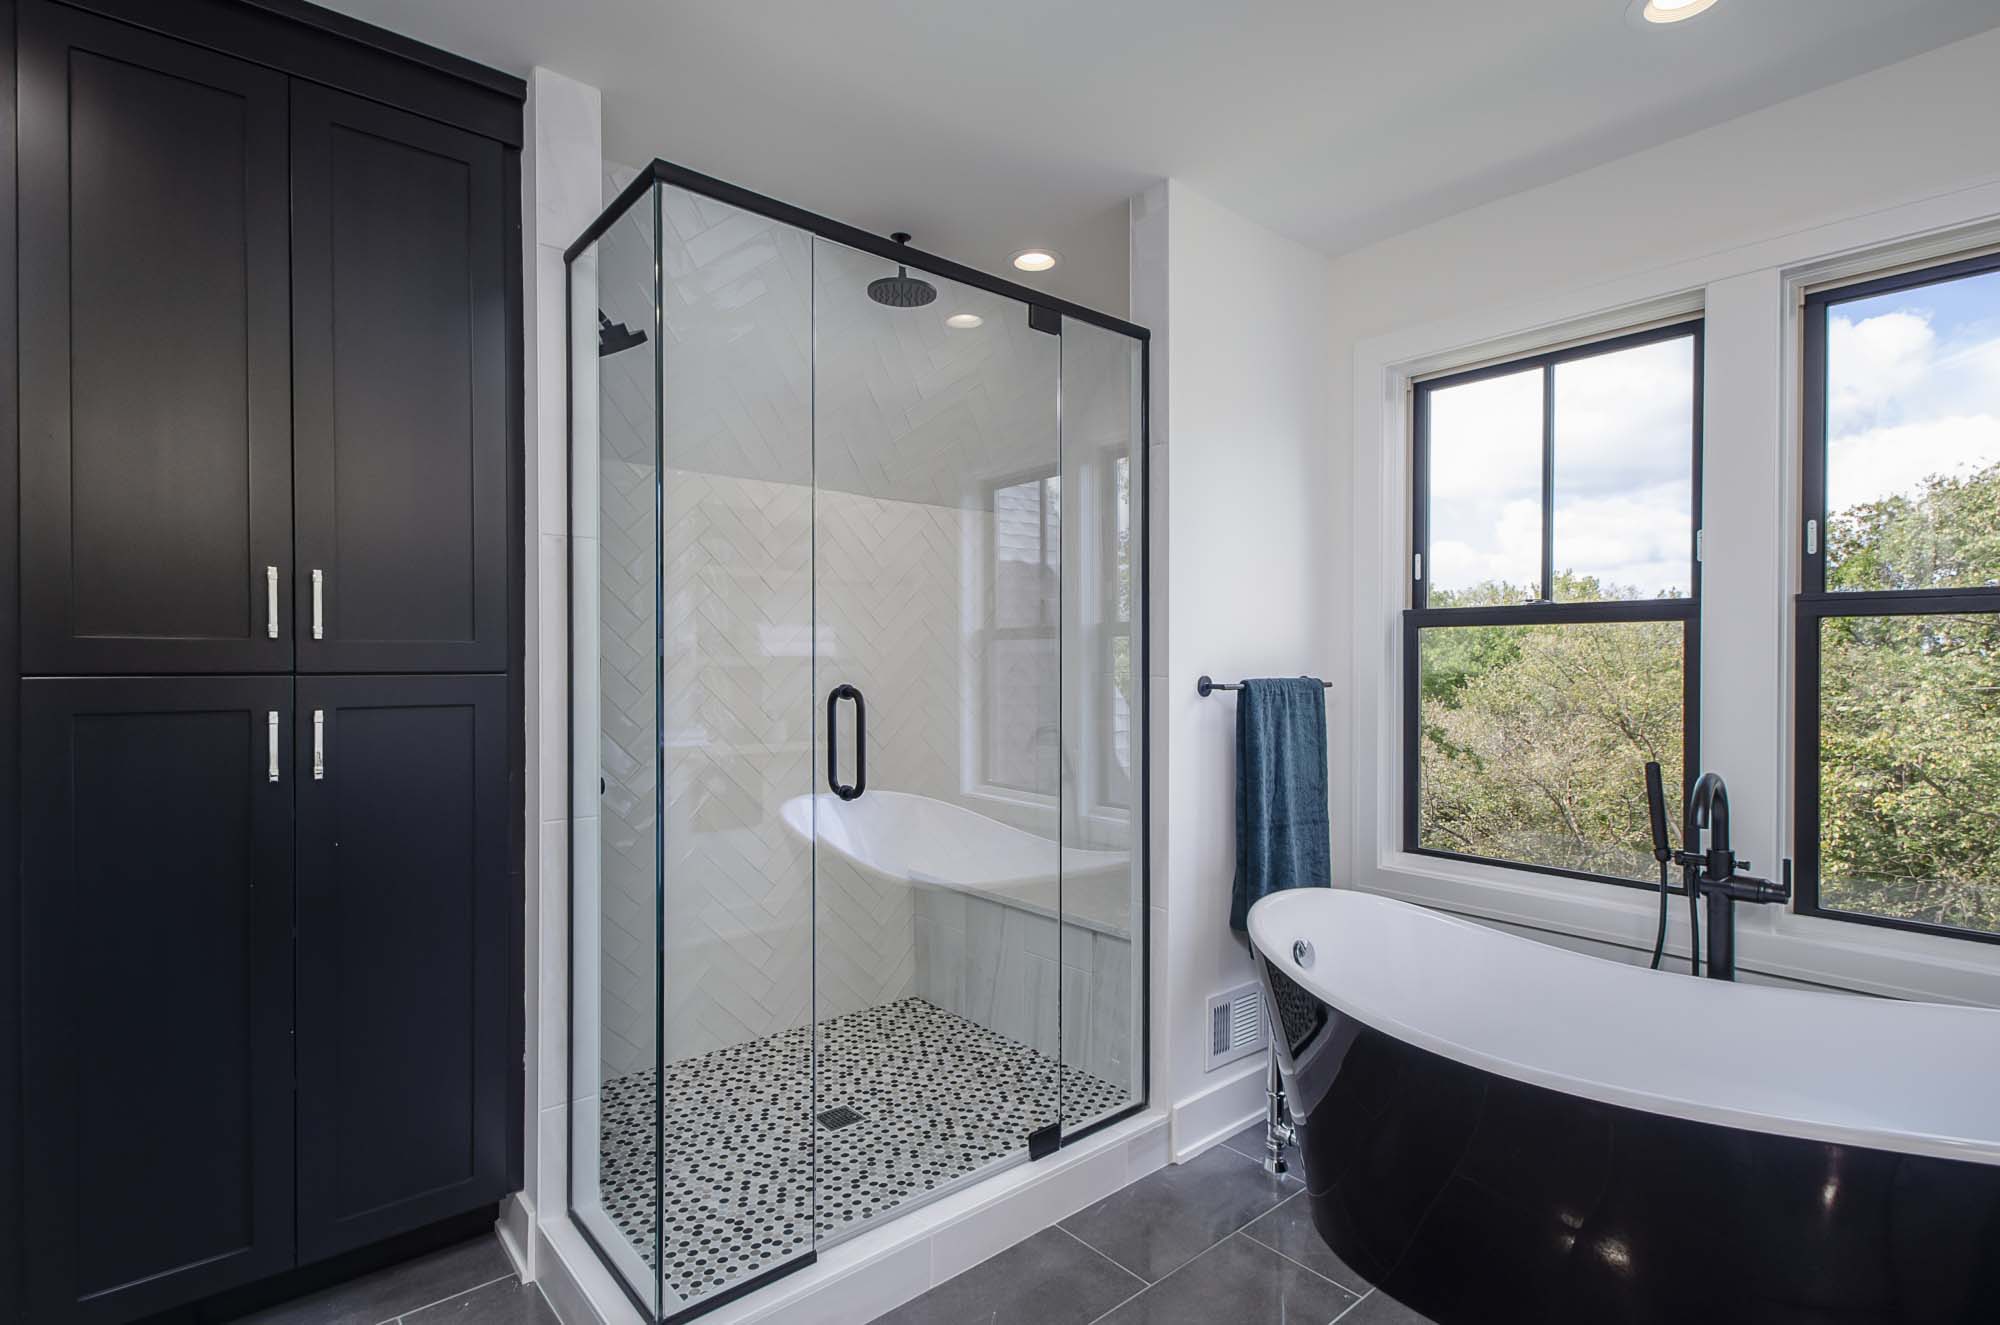 A black and white bathroom with a glass shower stall.